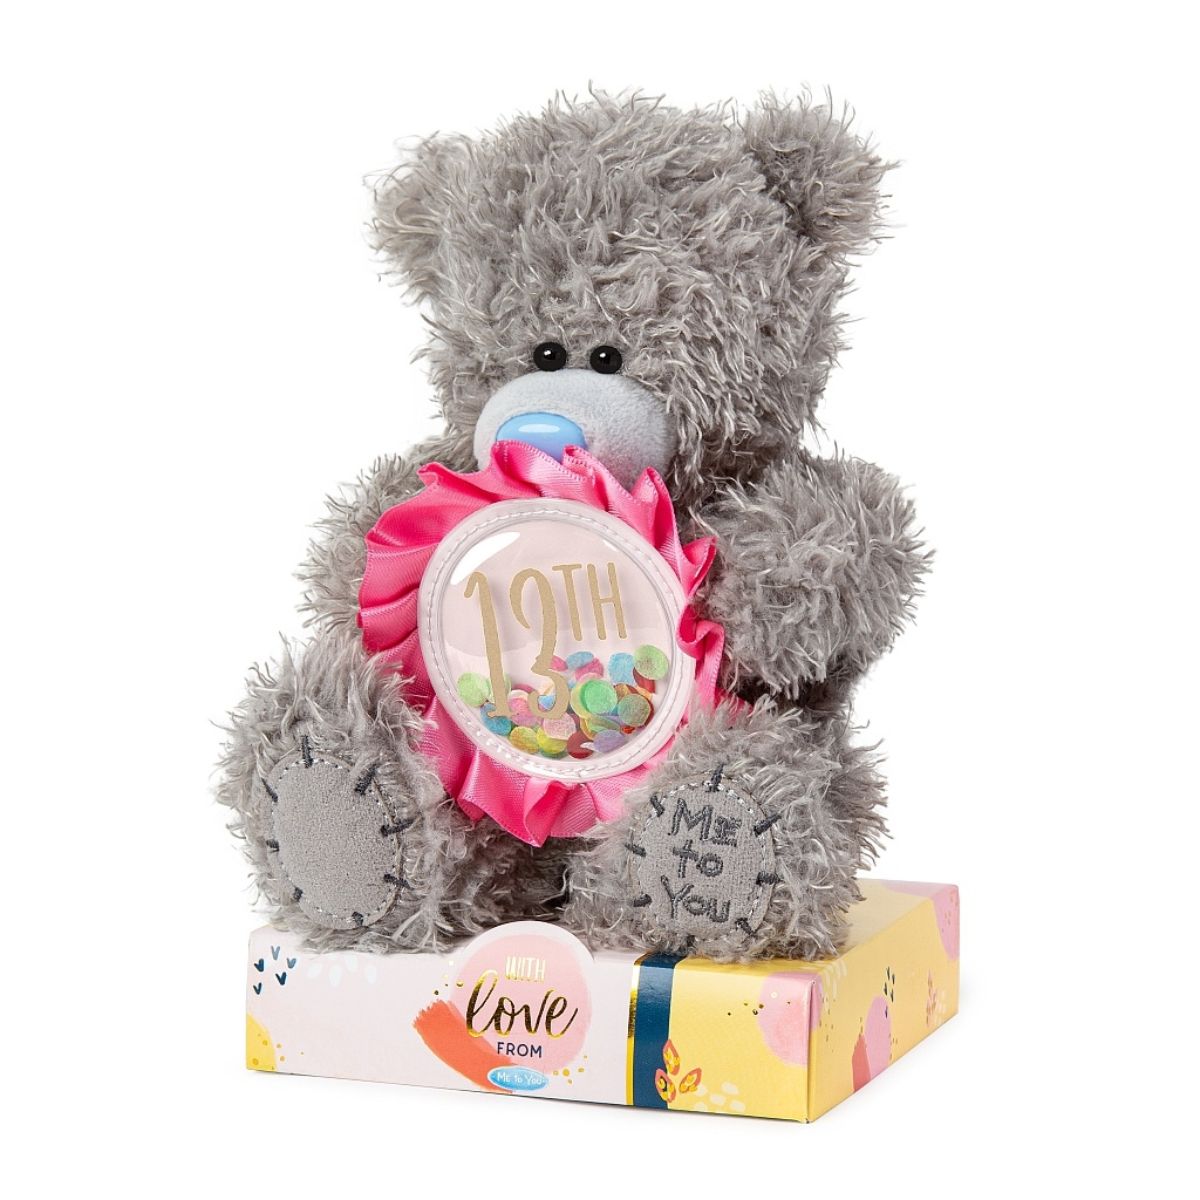 Me To You Bear in grey fur with blue nose sitting on brightly coloured packaging box and holding pink rosette with 13th text.